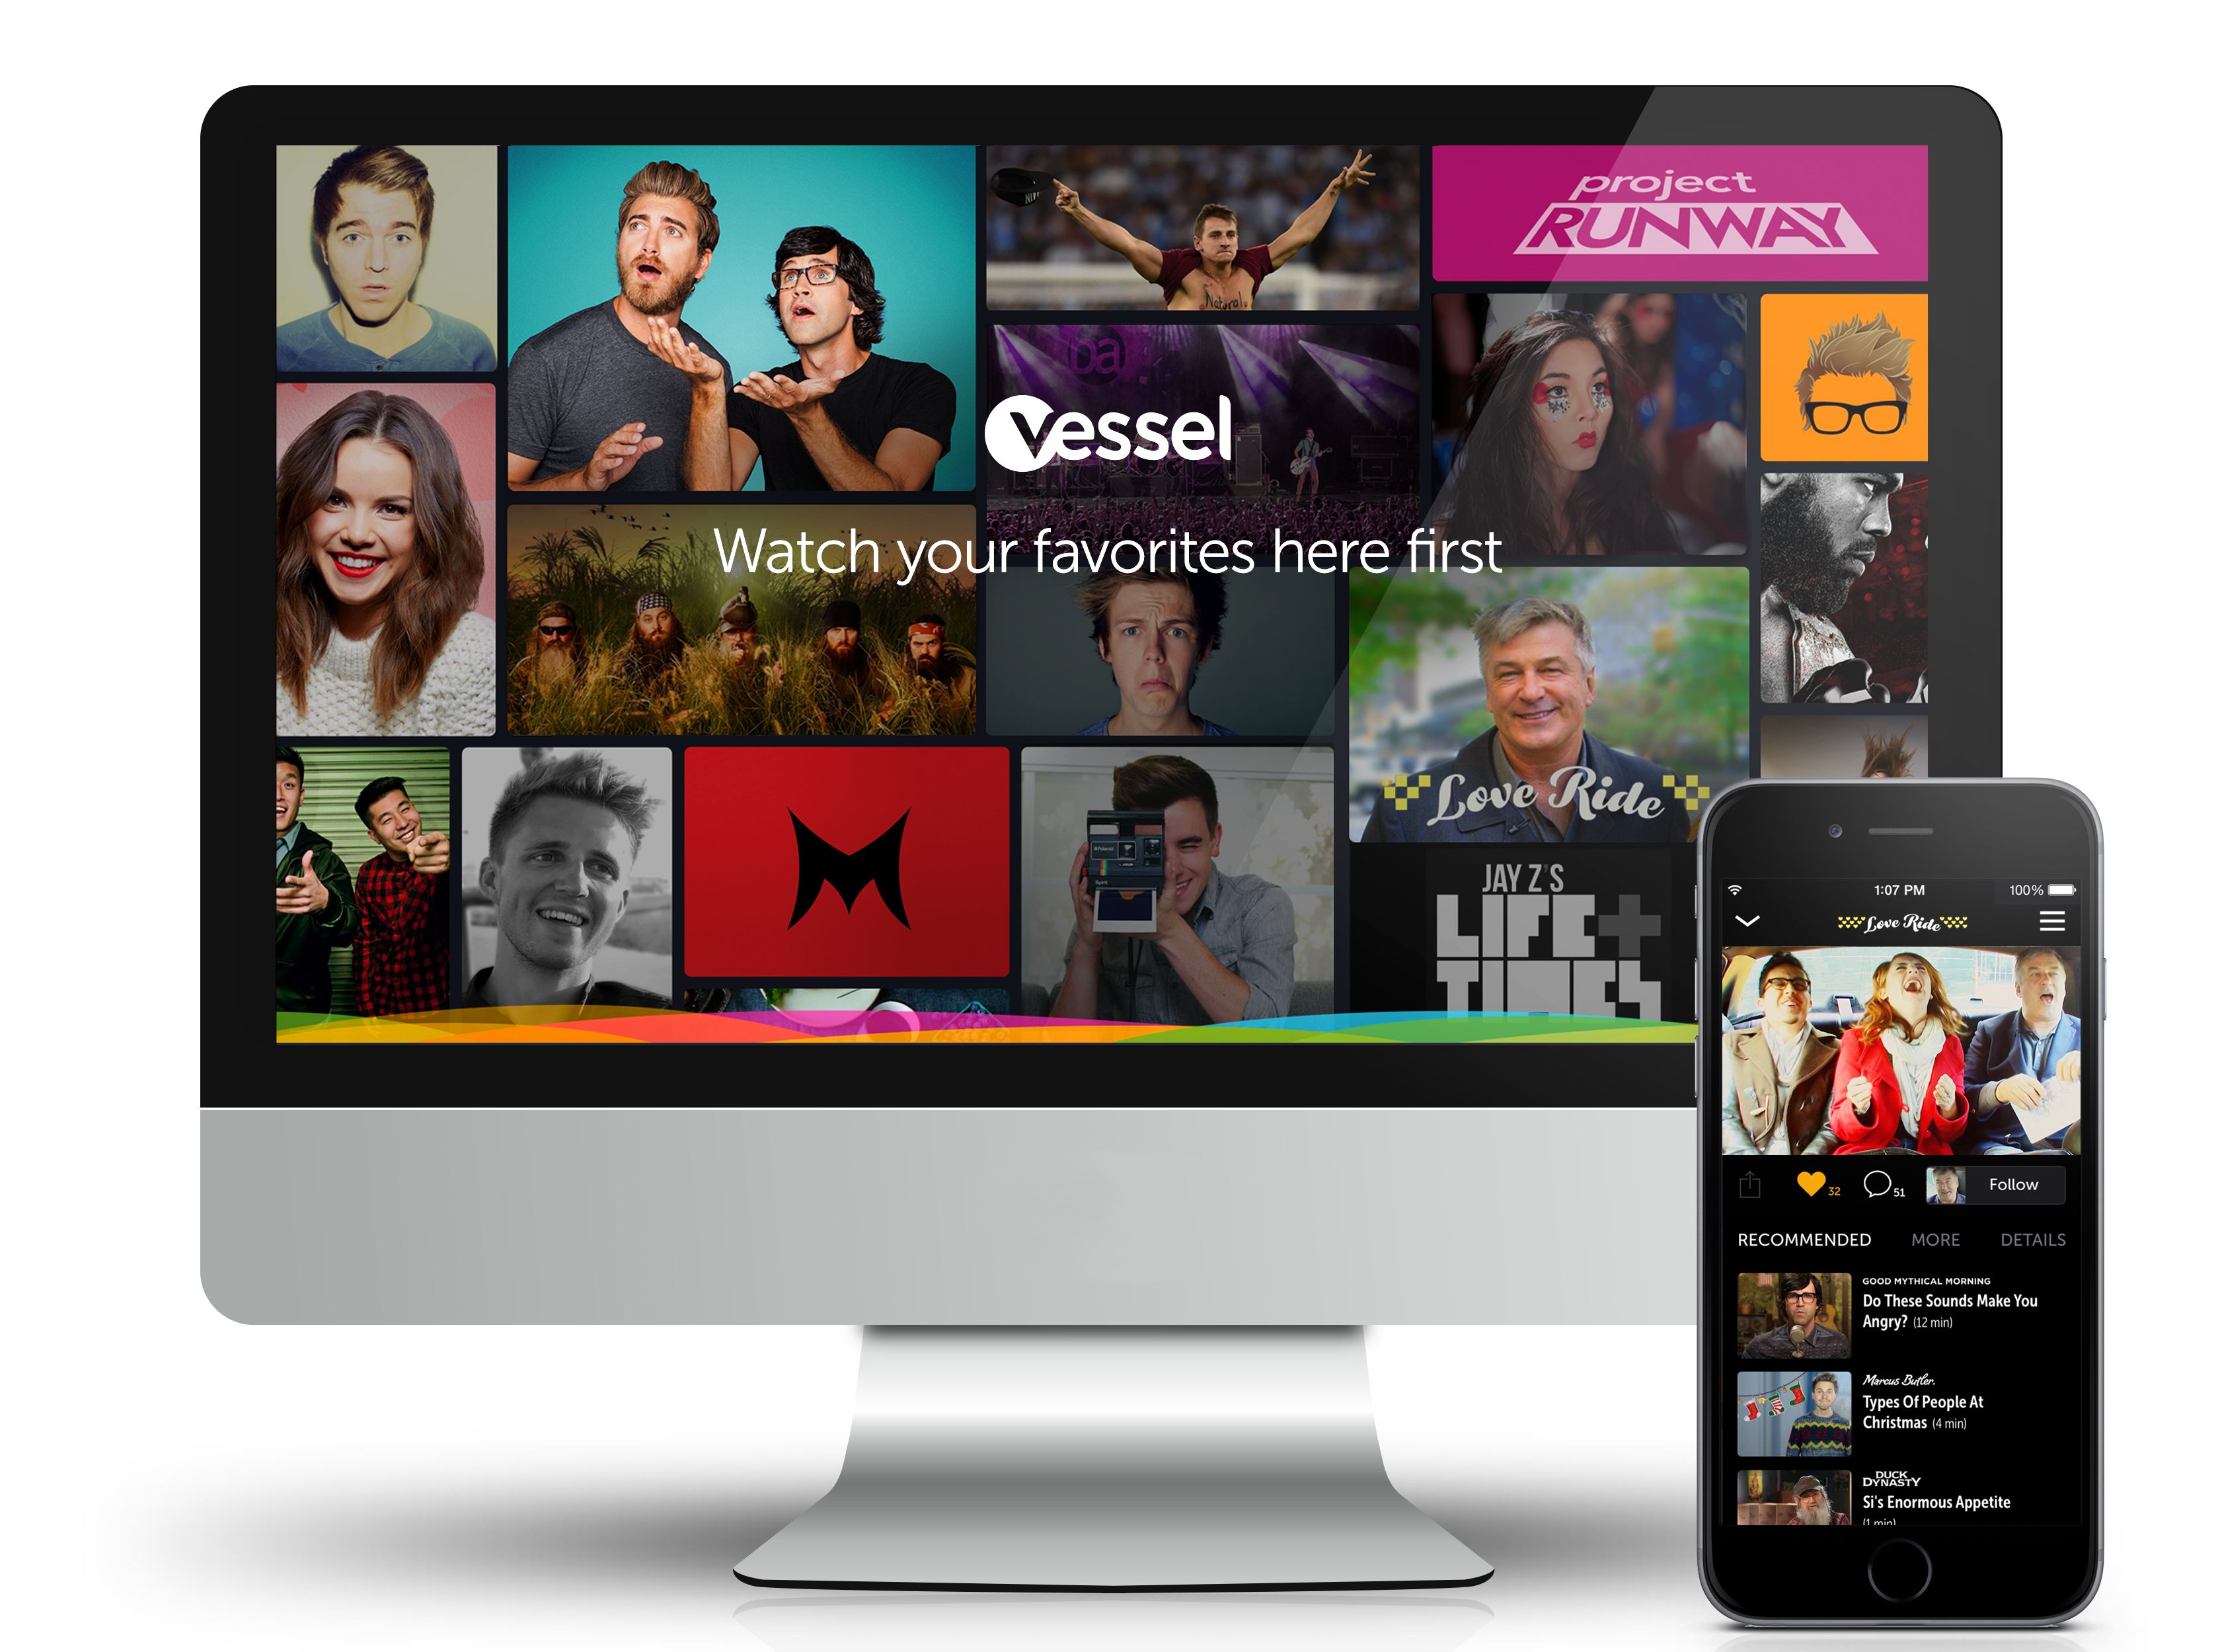 vessel premium video service hasn t even launched but is already nabbing youtube stars image 1